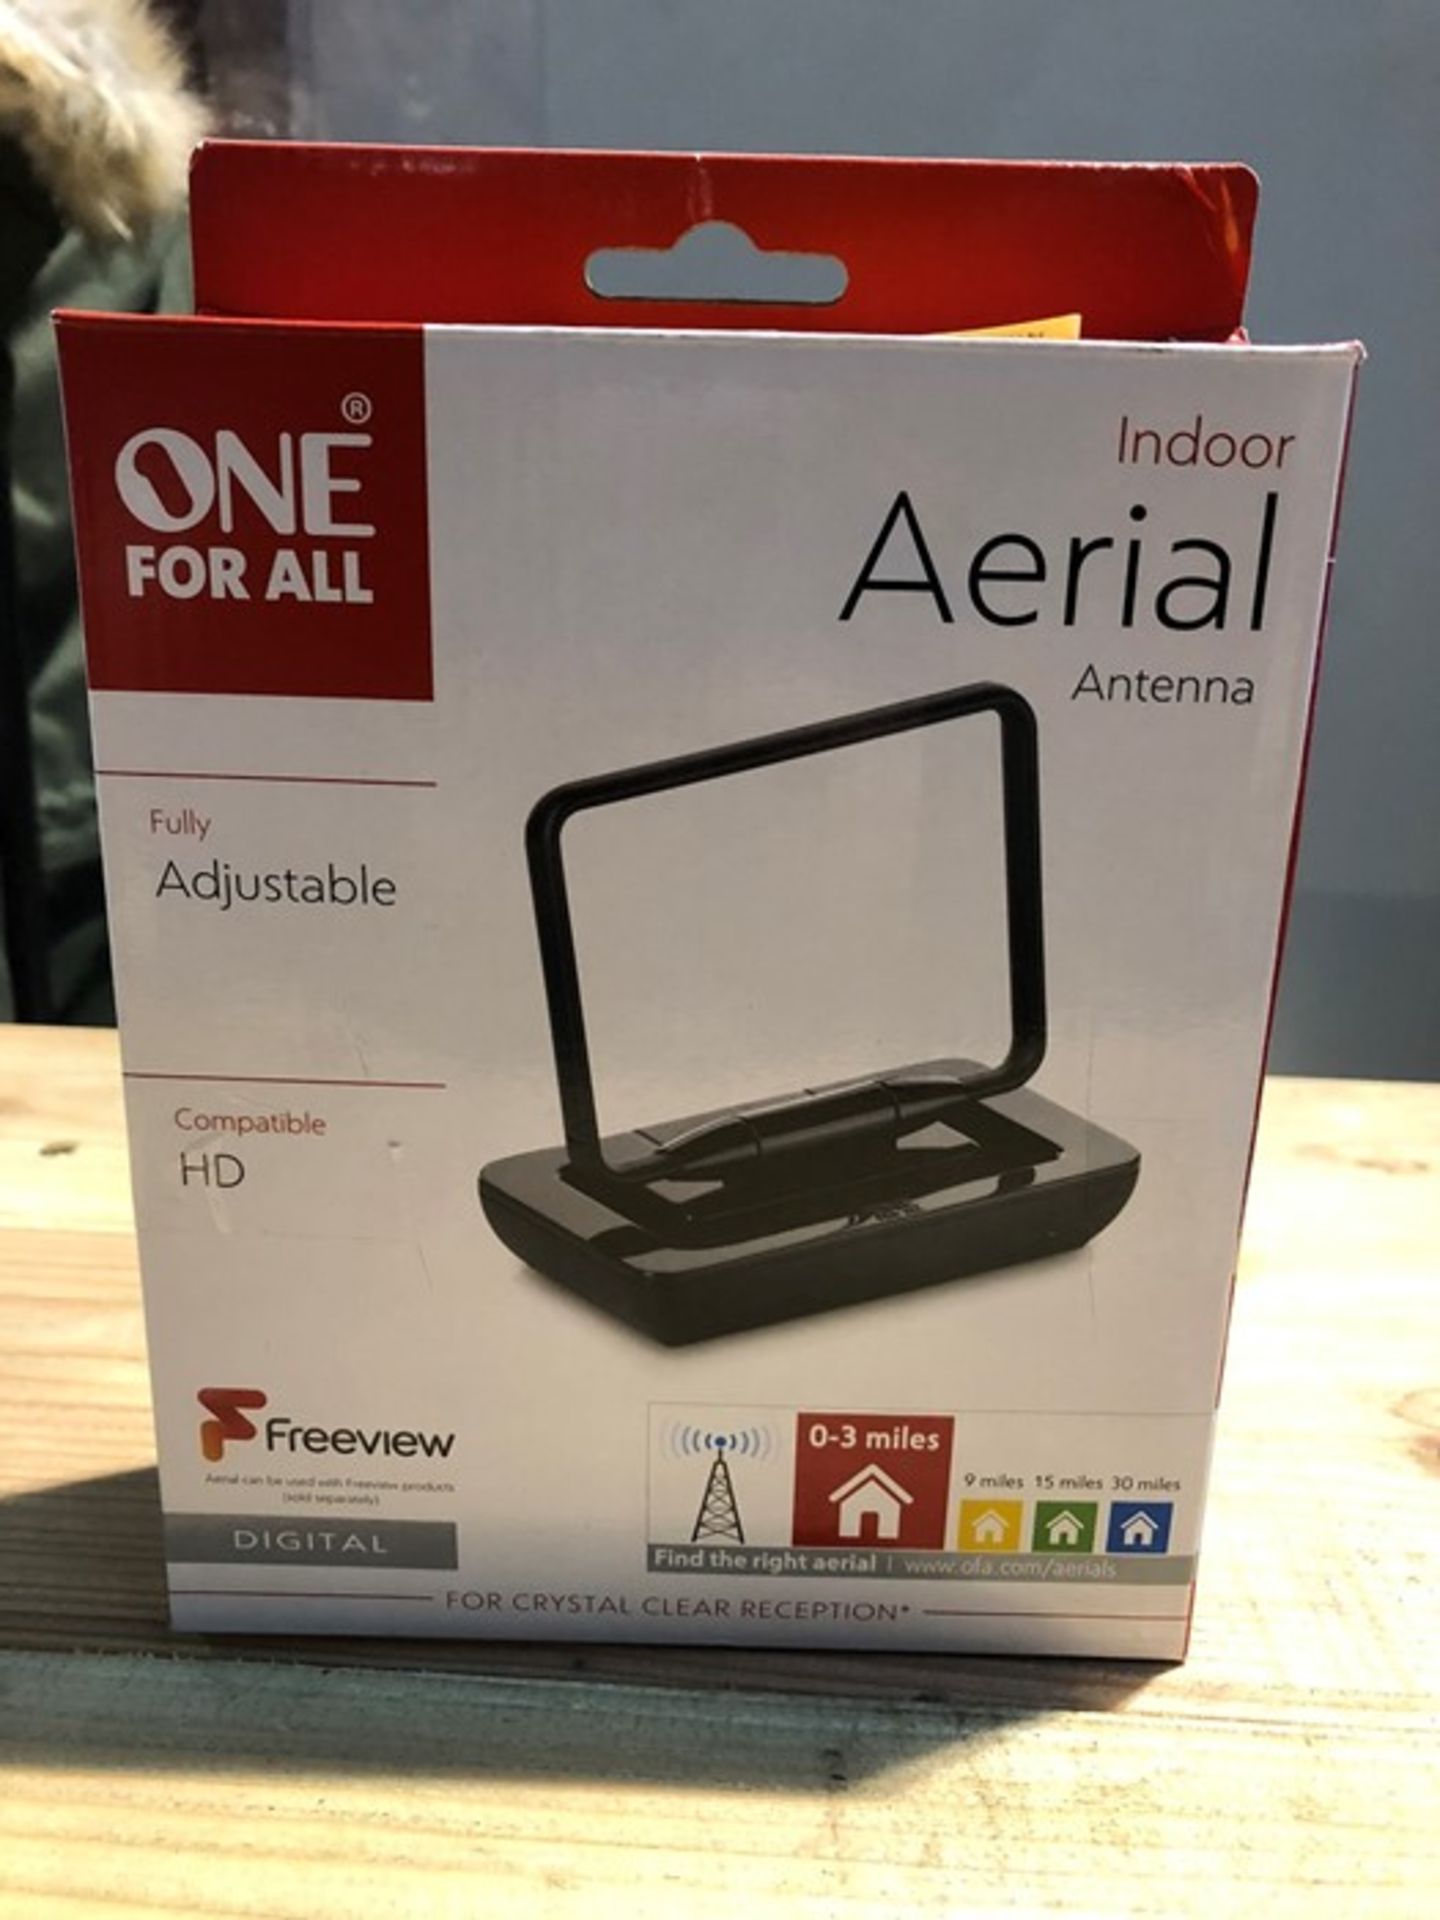 1 LOT TO CONTAIN 2 BOXED ONE FOR ALL ADJUSTABLE HD INDOOR AERIAL ANTENNA - SV9015 / RRP £26.58 /